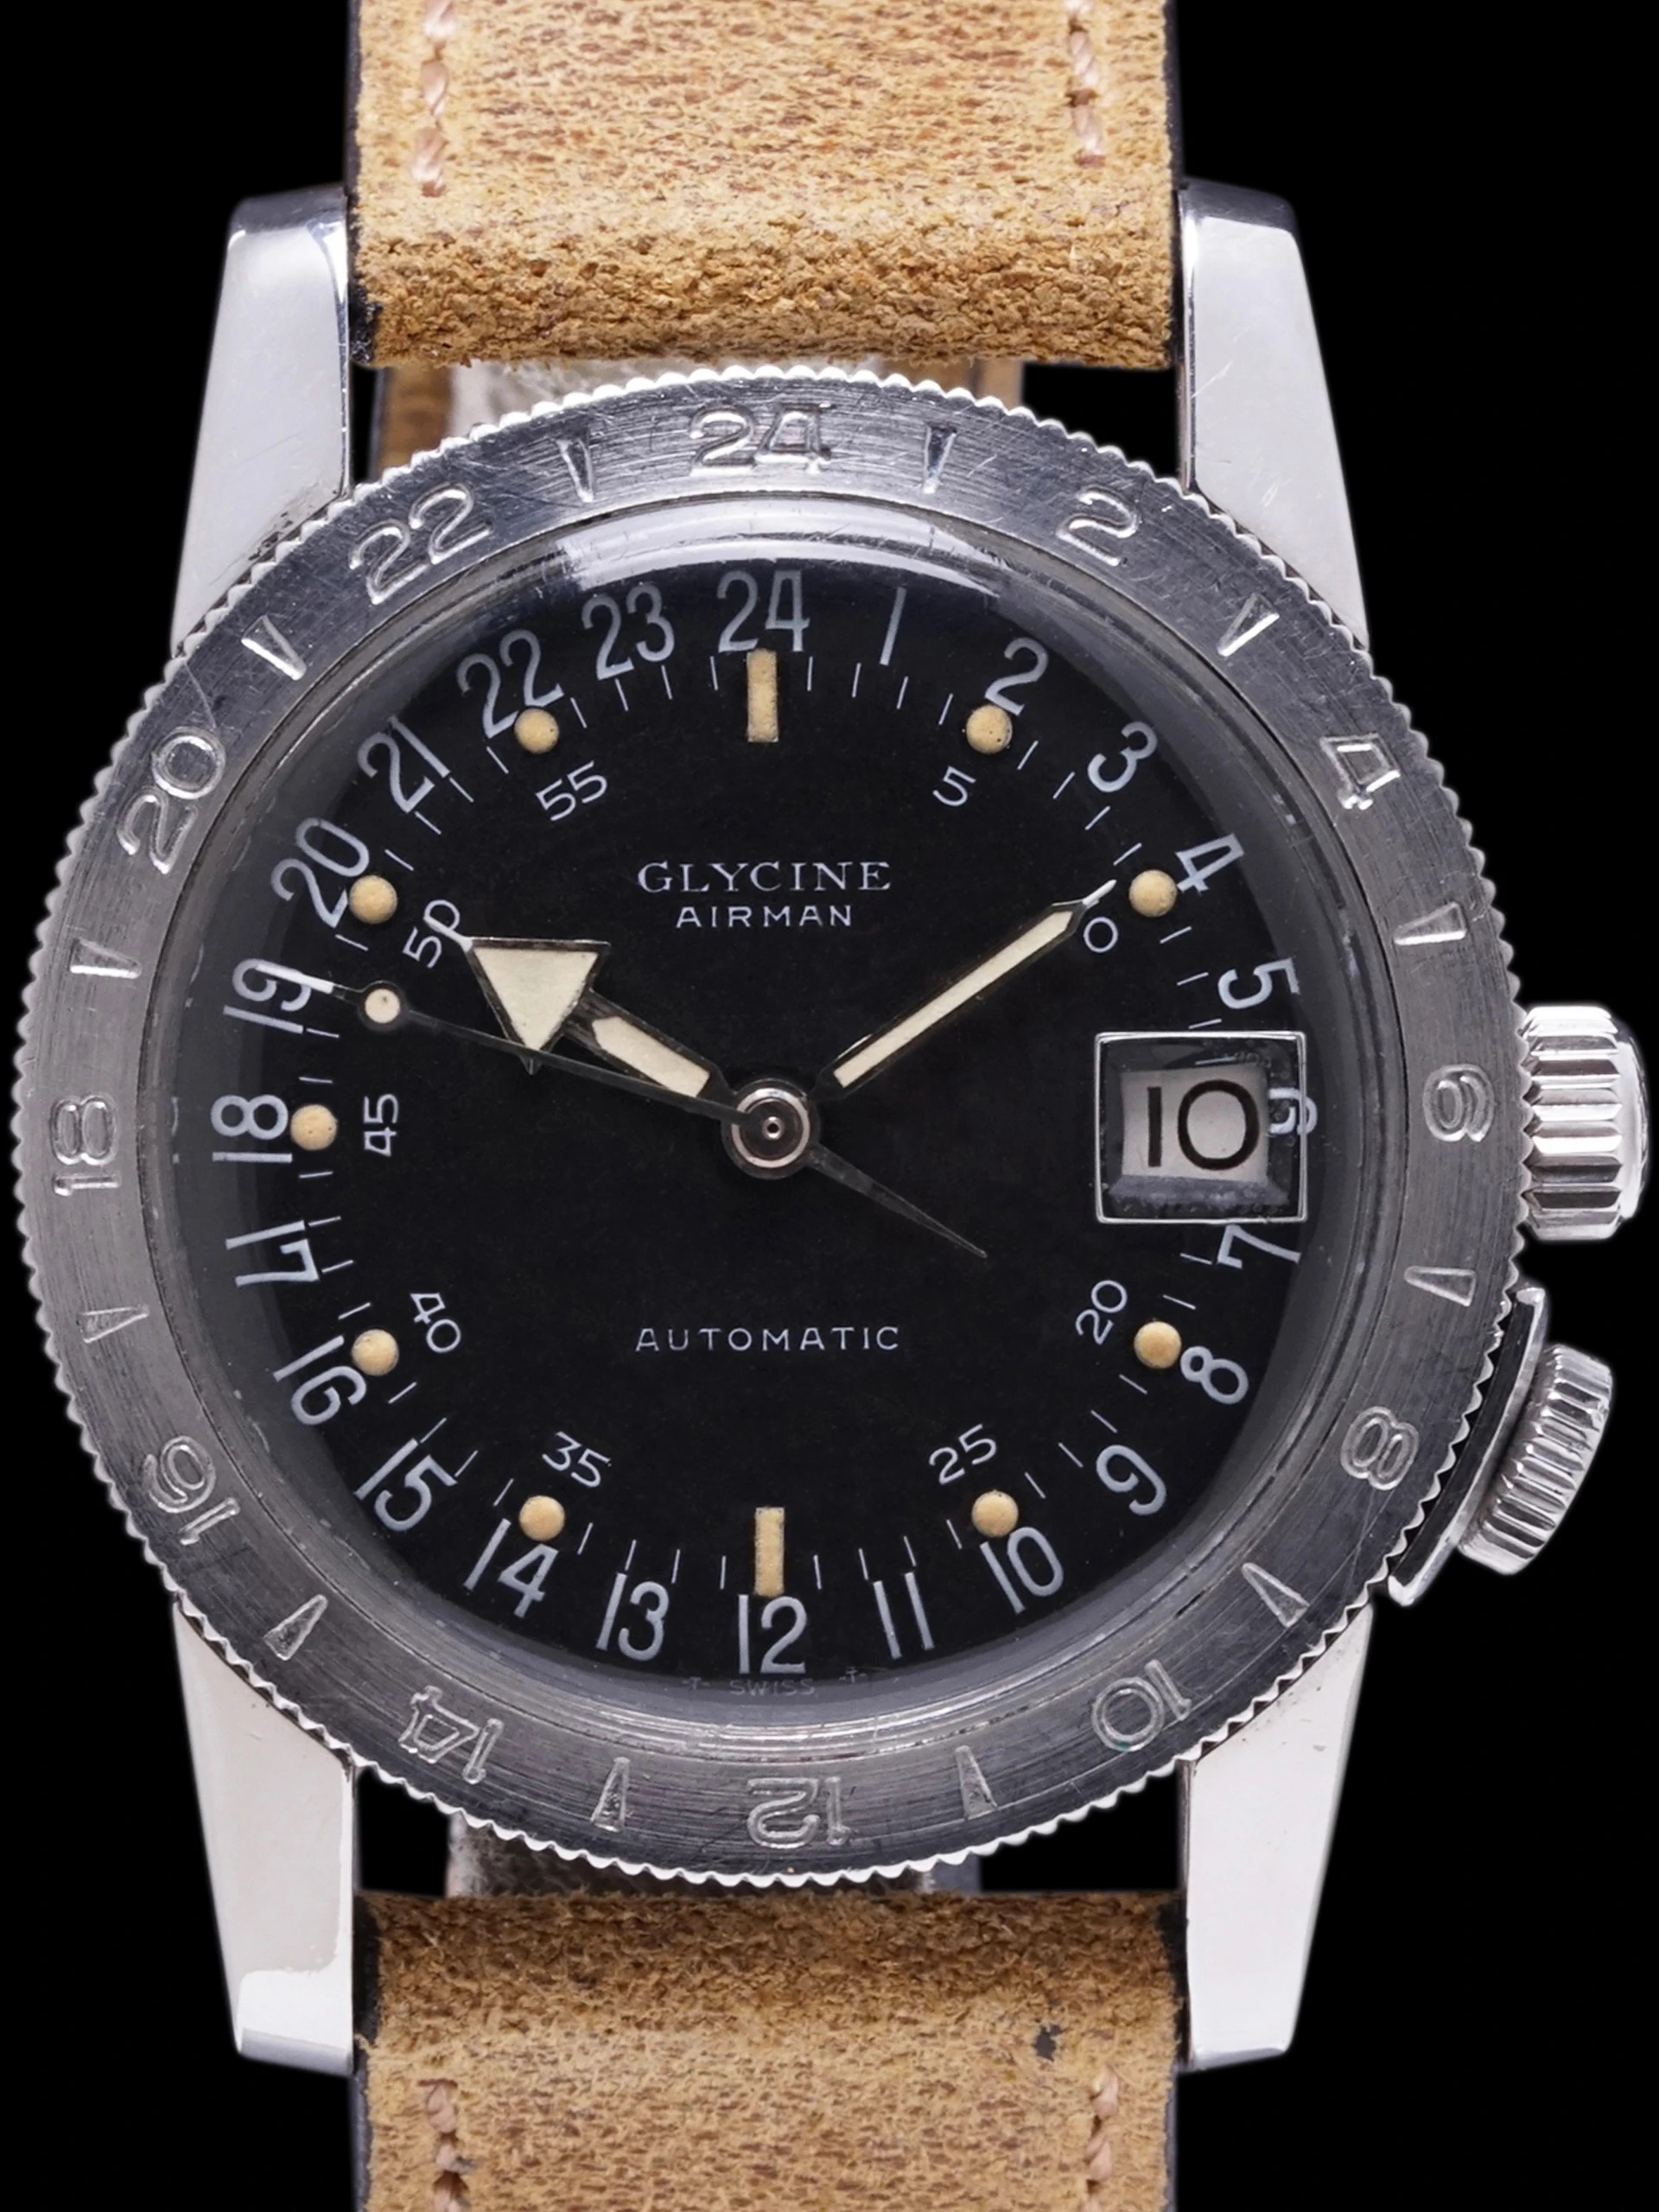 Glycine Airman 24 Automatic Vintage Watch PAT. 314.050 for $3,695 for sale  from a Seller on Chrono24